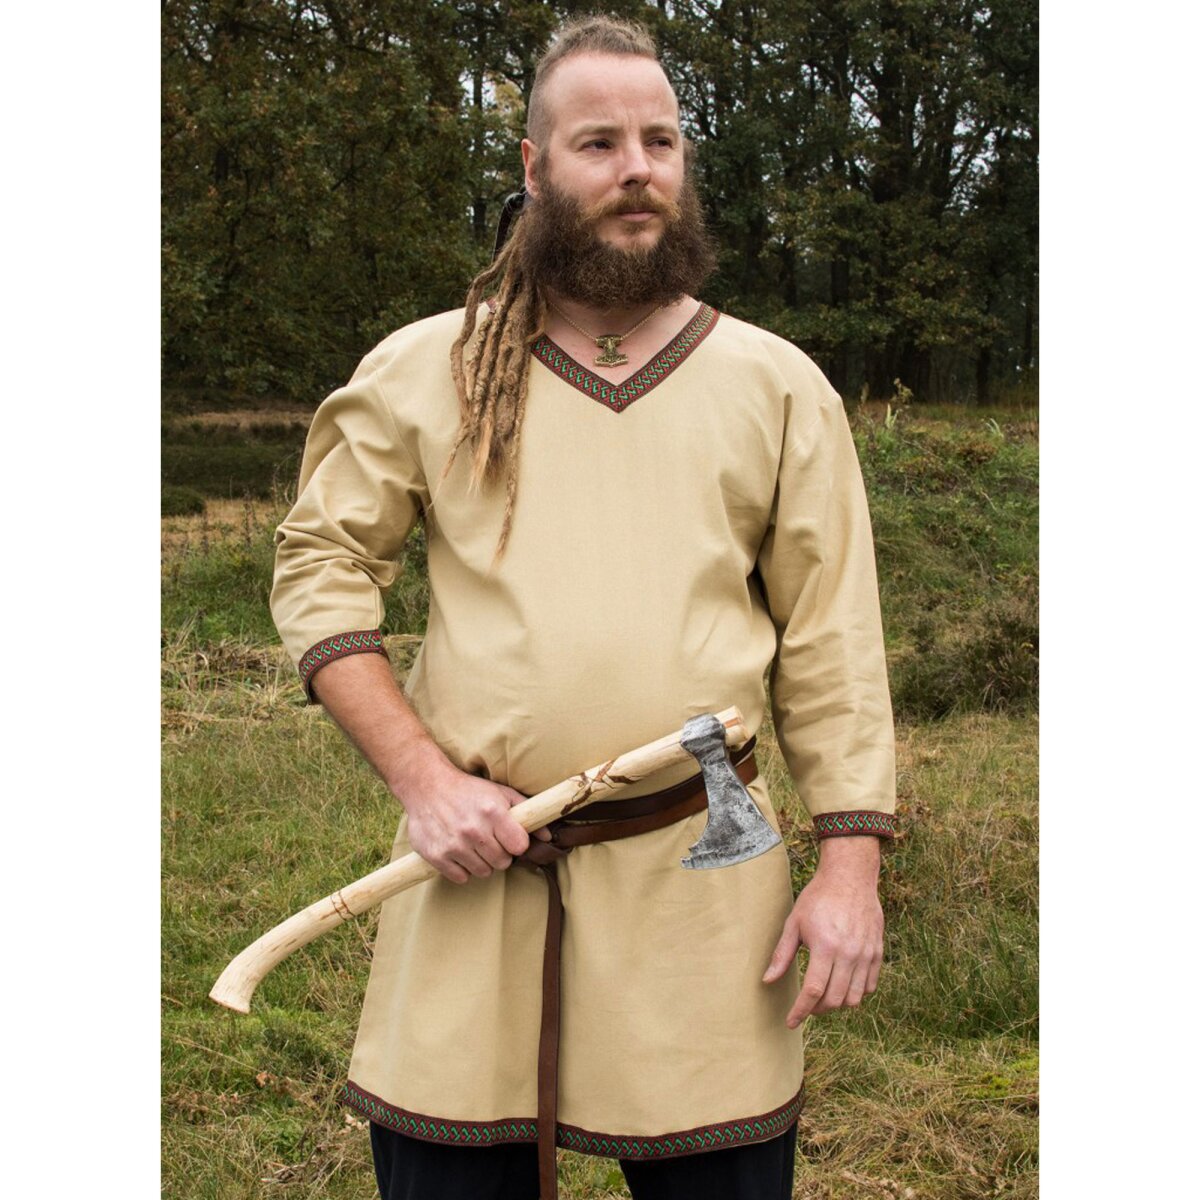 Viking Tunic made of cotton, beige, 29,99 €